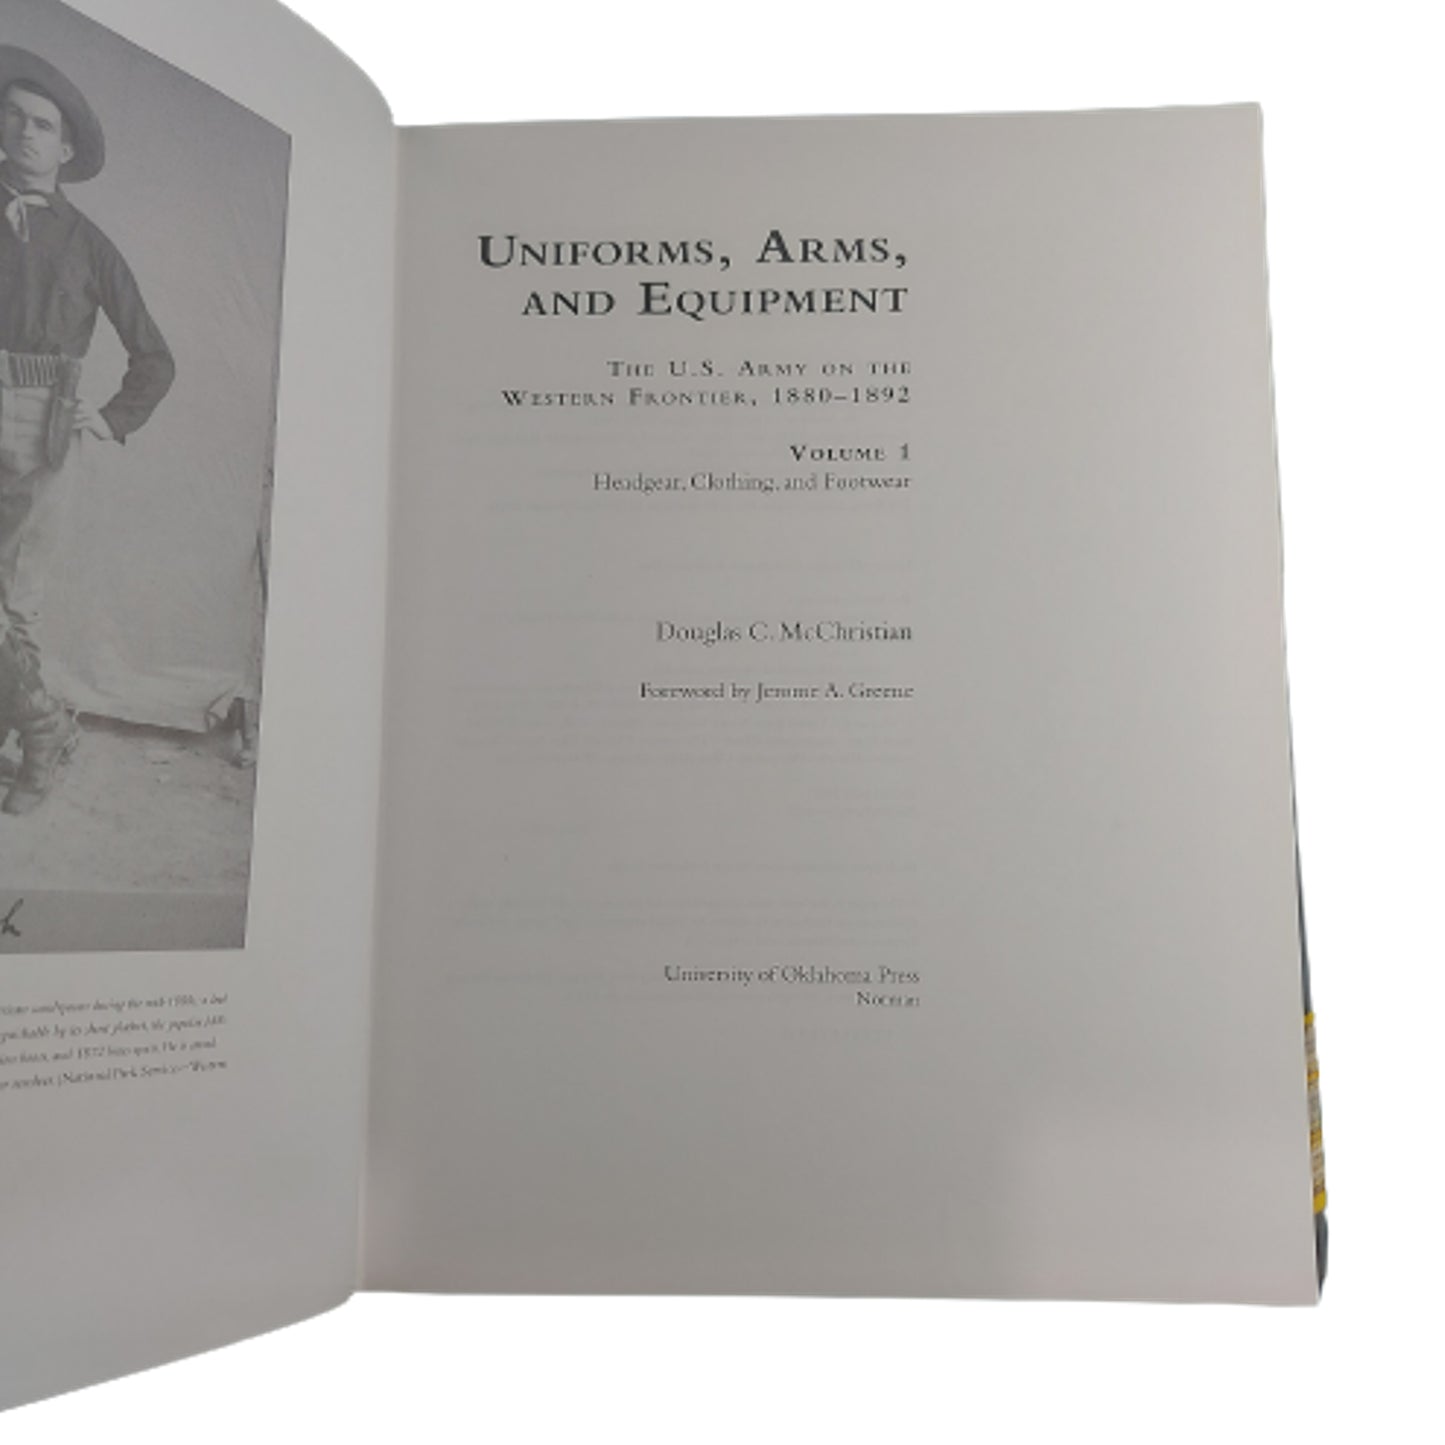 Uniforms, Arms, And Equipment If The U.S. Army 1880-1892 Vol. 1 Headgear, Clothing And Footwear